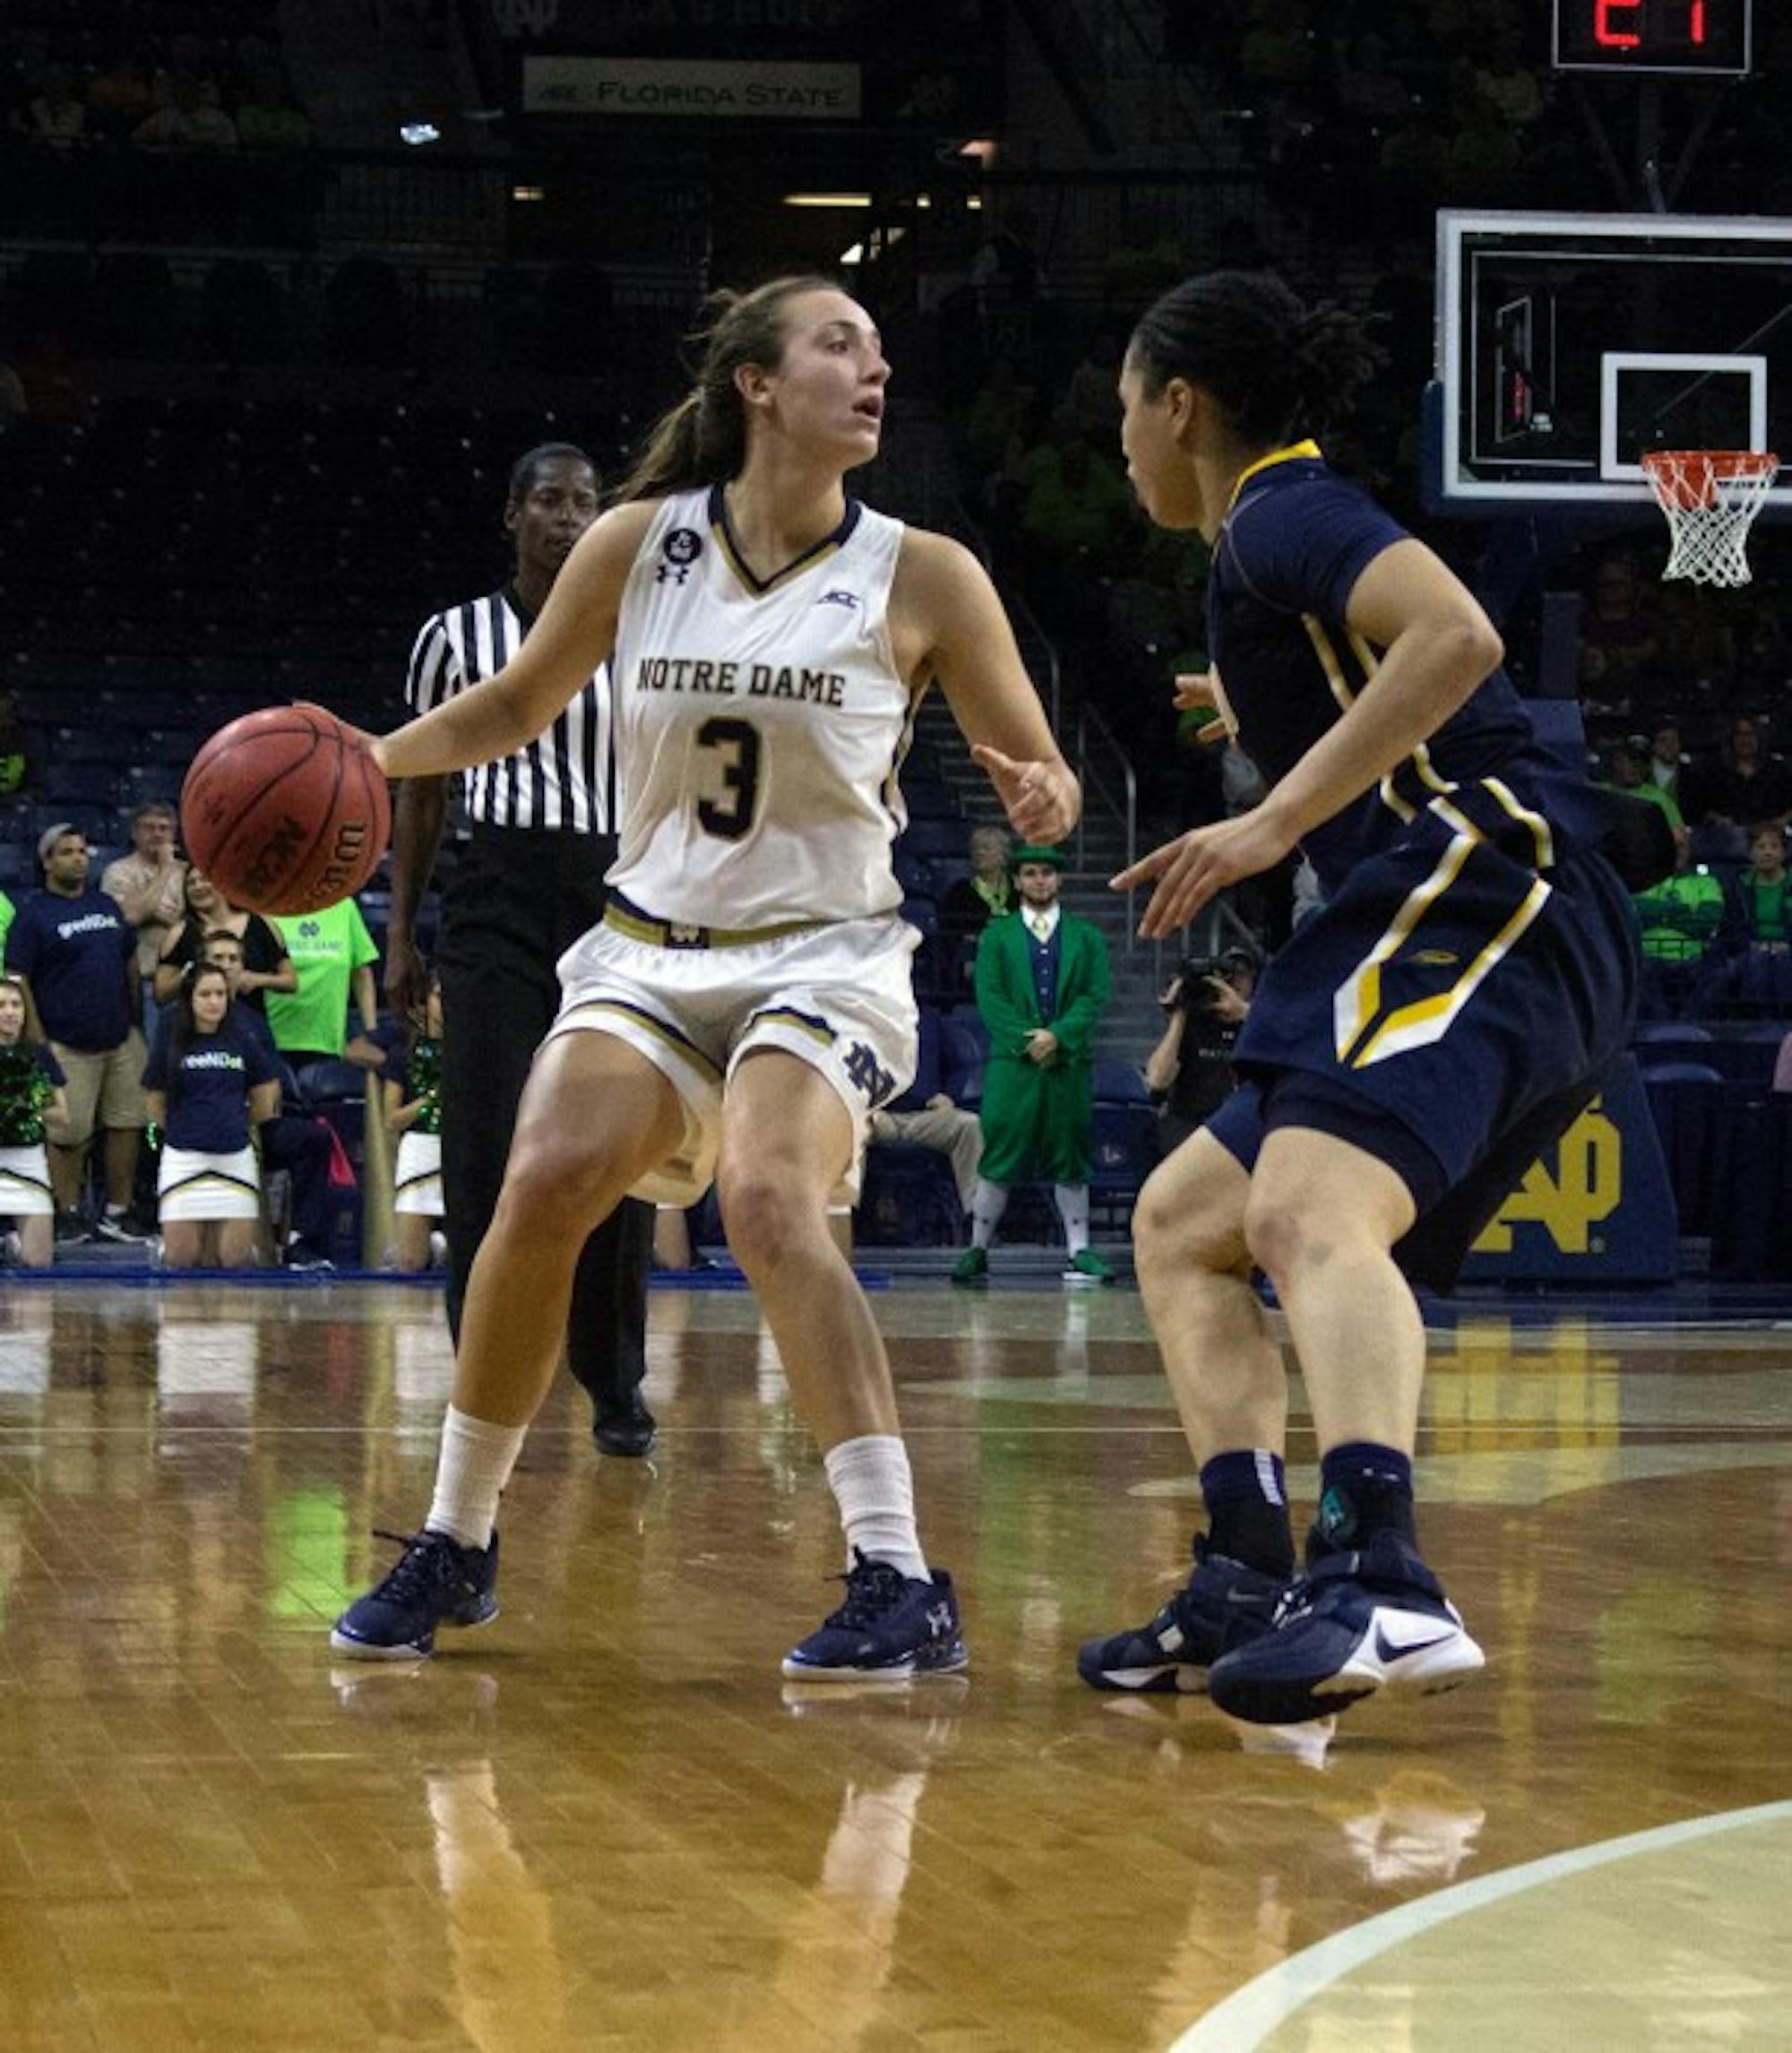 Irish freshman guard Marina Mabrey looks for a passing lane during Notre Dame's 74-39 win over Toledo on Nov. 18 at Purcell Pavilion.